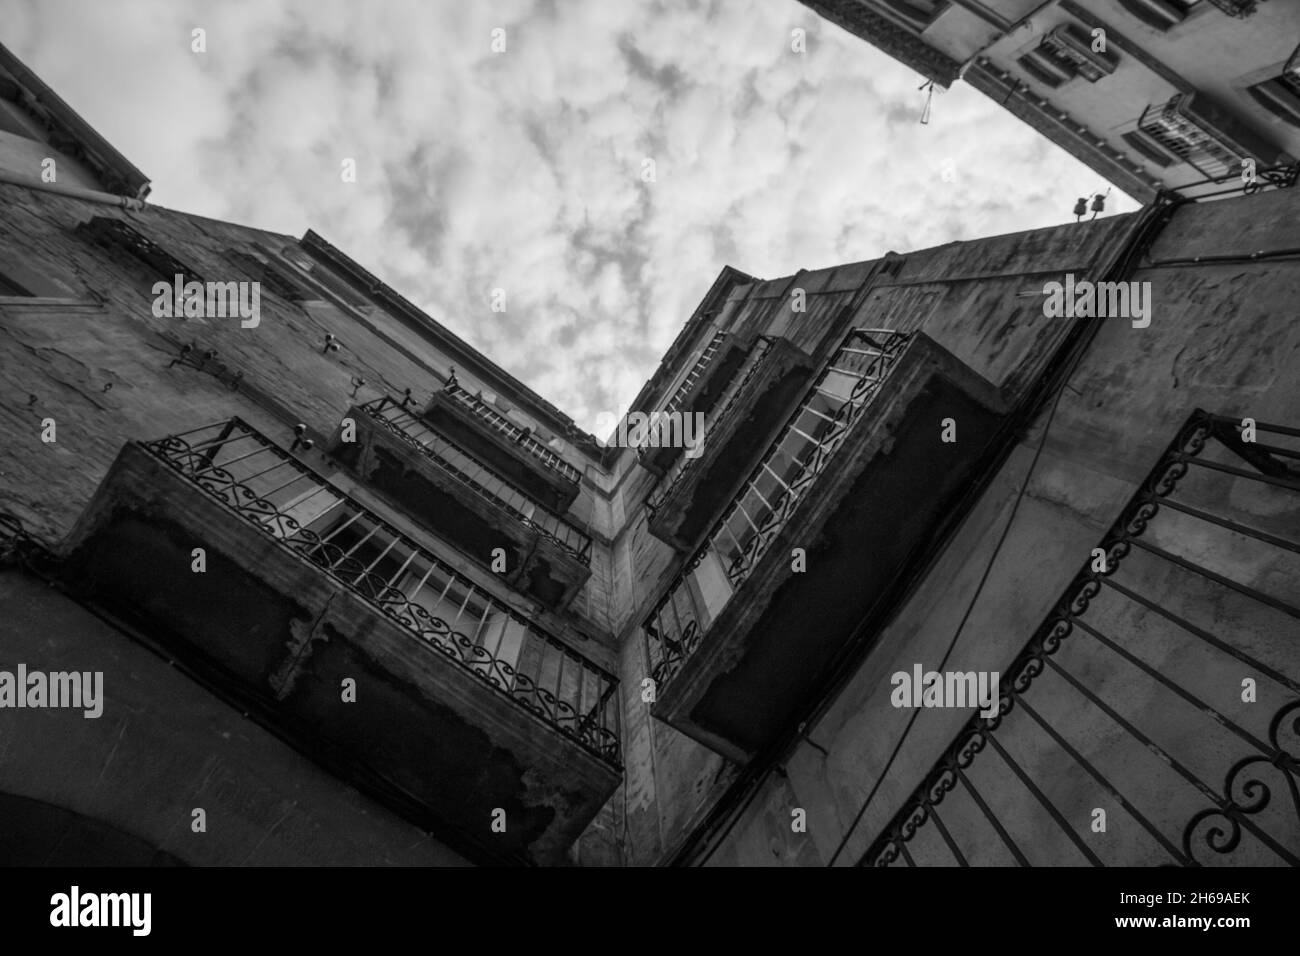 A low angle shot of old apartment buildings with balconies Stock Photo